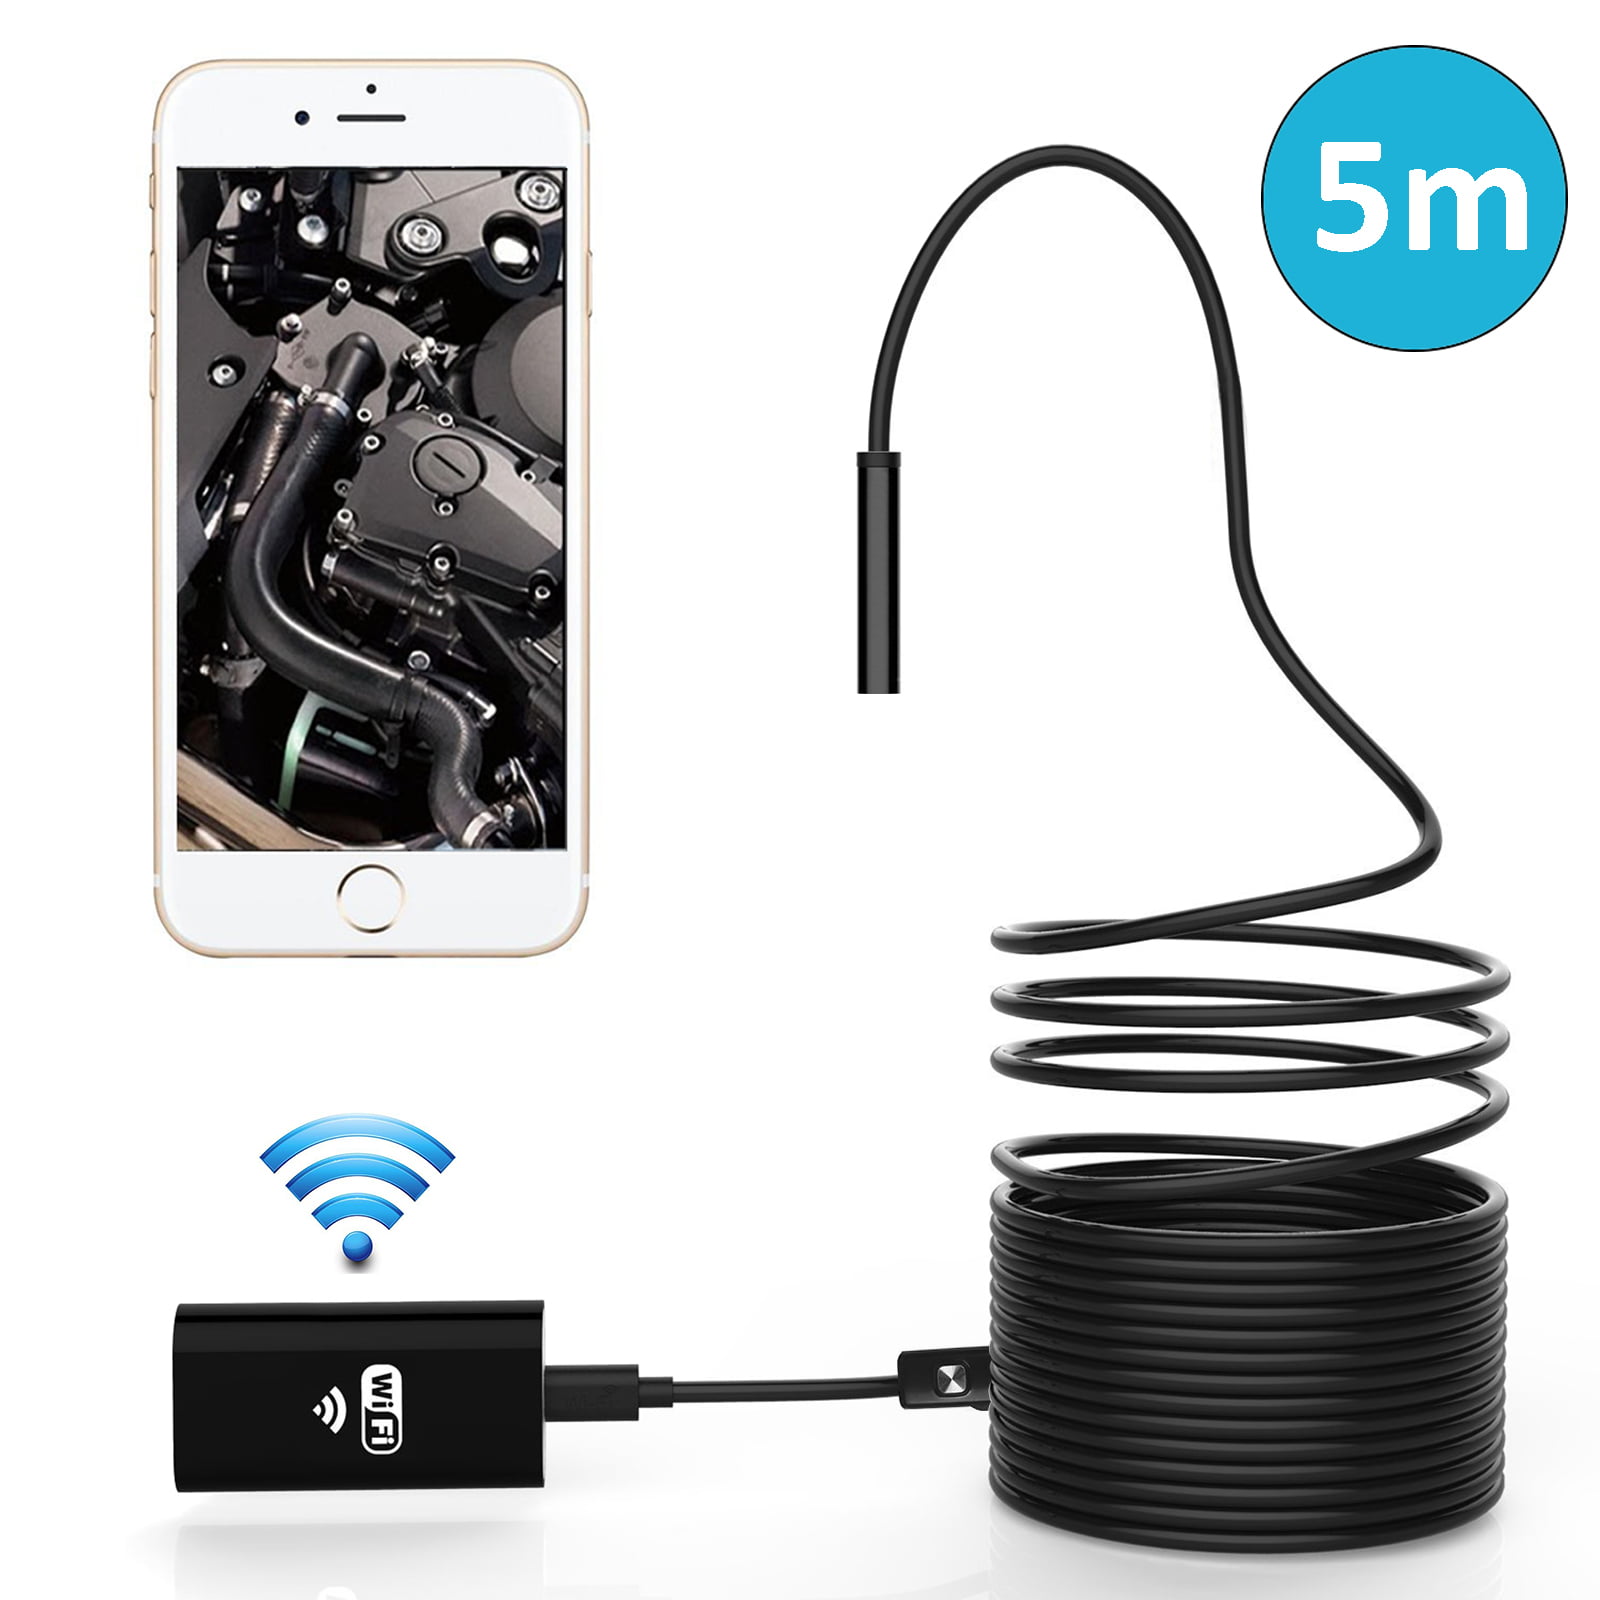 DEPSTECH Dual Lens Borescope Zoom Waterproof WiFi Endoscope for Android & iOS Smartphone Tablet-16.4Ft Wireless Endoscope HD Snake Inspection Camera with 6 Adjustable LED 